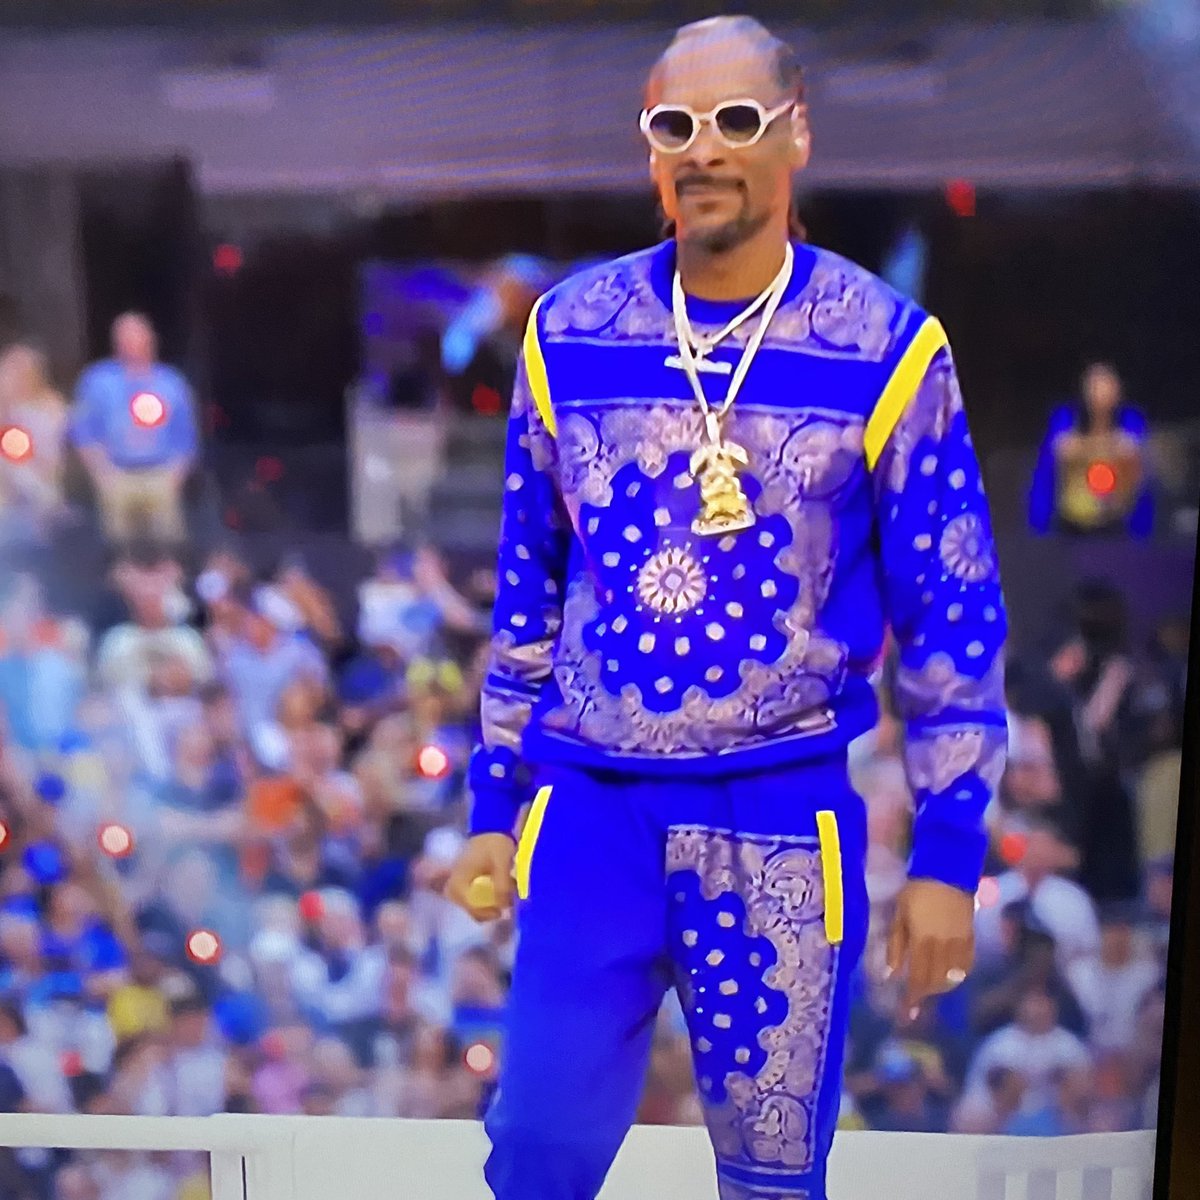 drop the liketoknowit link Snoop I need this outfit #SuperBowl #PepsiHalftime